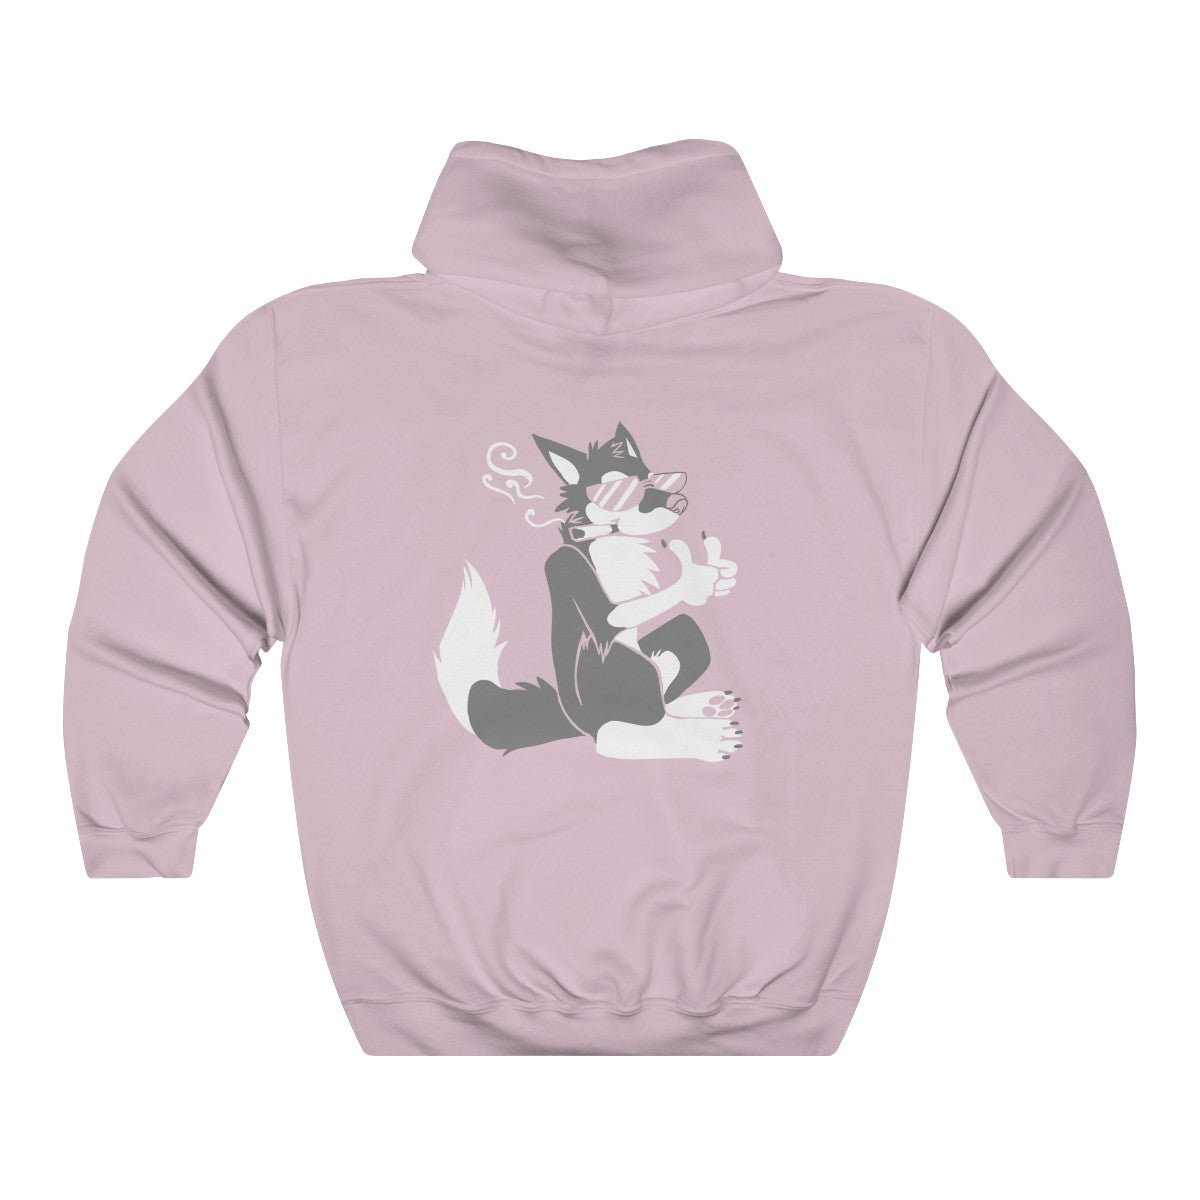 Chill Out - Hoodie Hoodie Dire Creatures Light Pink S 